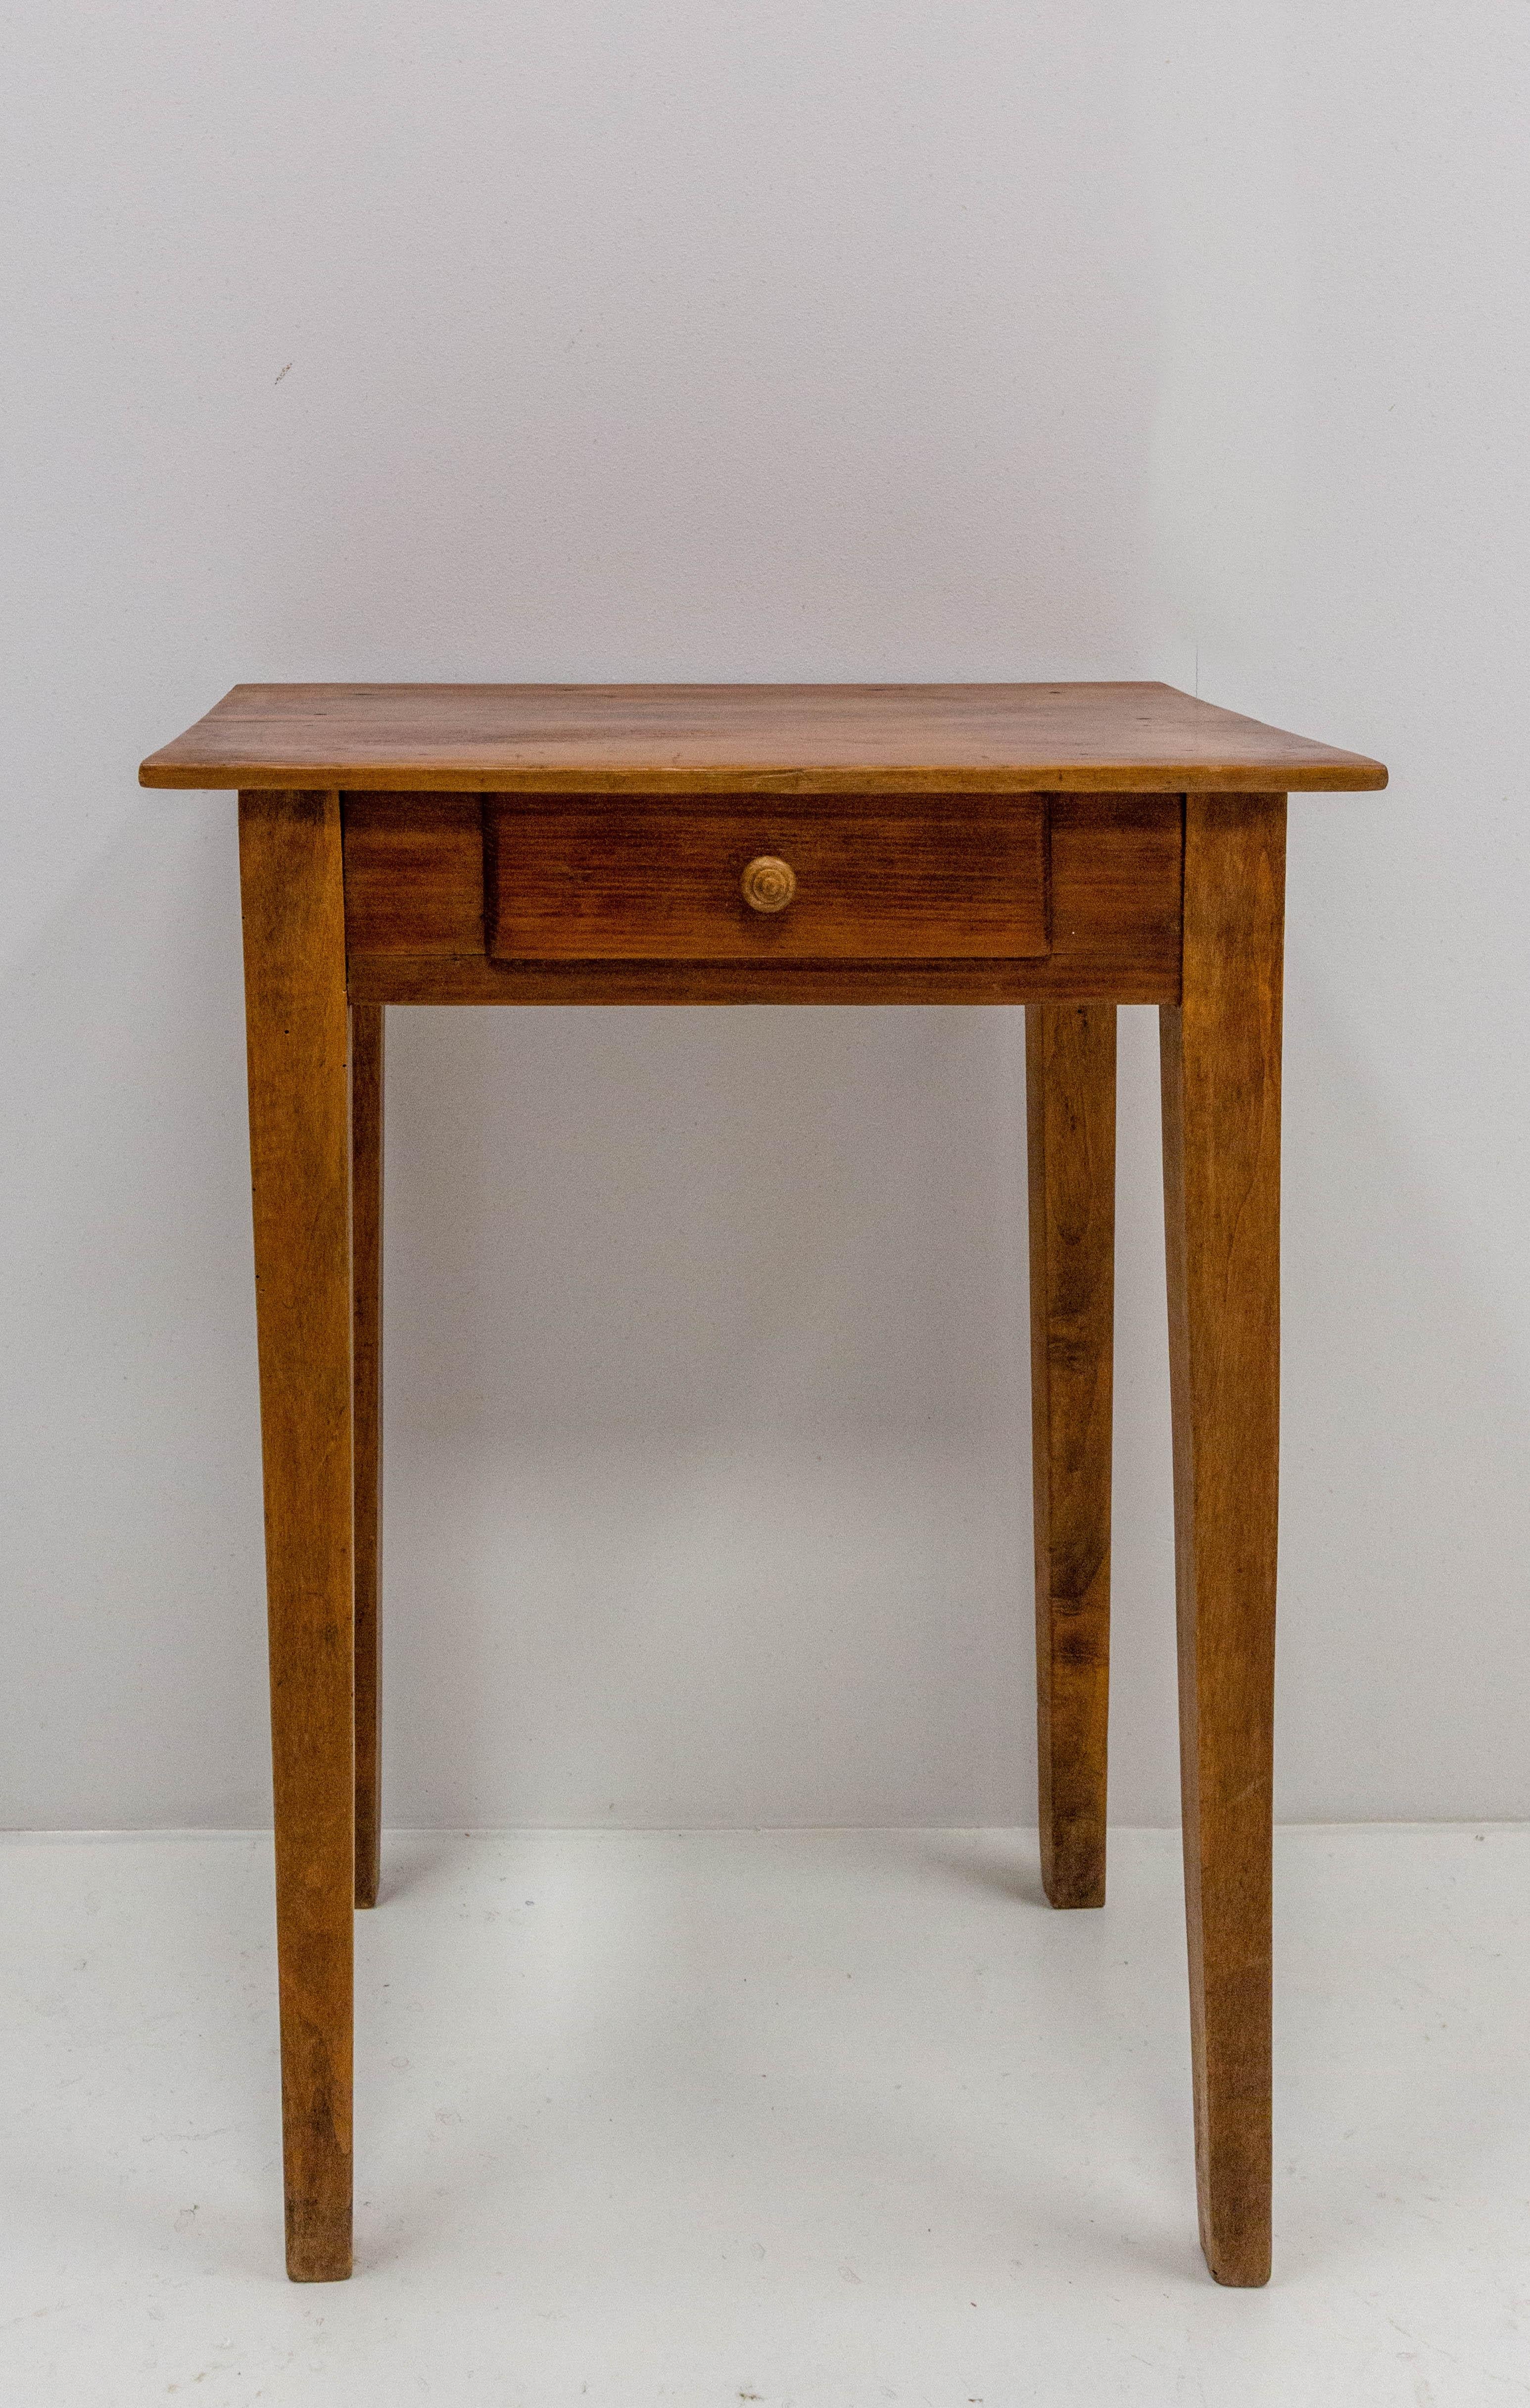 End table or side table with drawer
Poplar and pine
French, circa 1910
Good condition

wooden case 58 76 44 cm 16 kg.
    